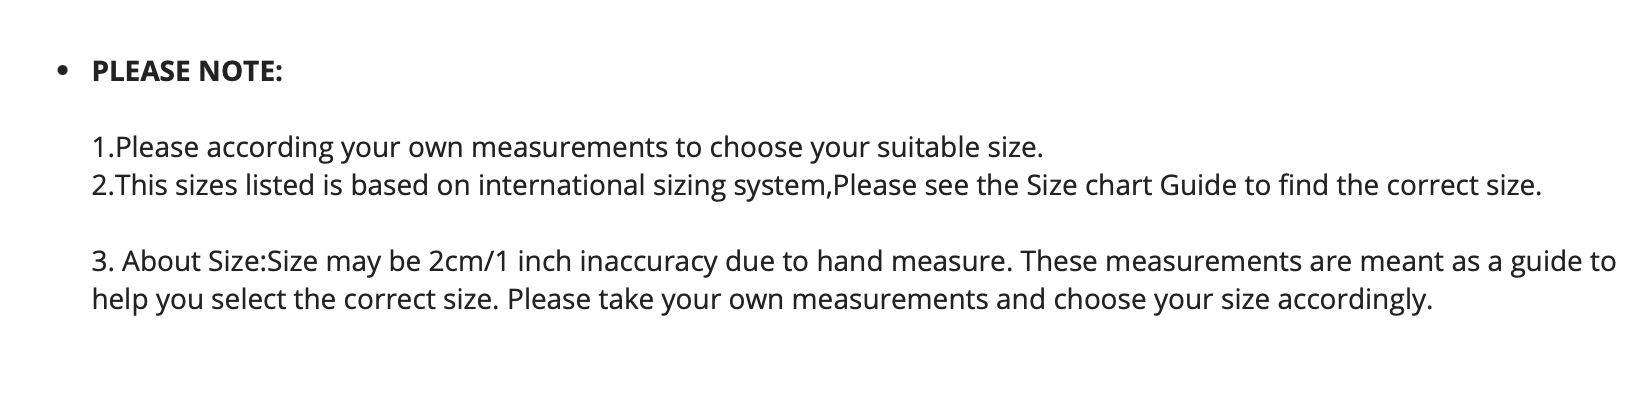 The sizes listed is based on an international sizing system. Please see the size chart guide to find the correct size. Size maybe 2 cm or 1 inch in accurate due to heat and measuring. These measurements are meant as a guide to help you select the correct size. Please take your own measurements and choose your size accordingly.